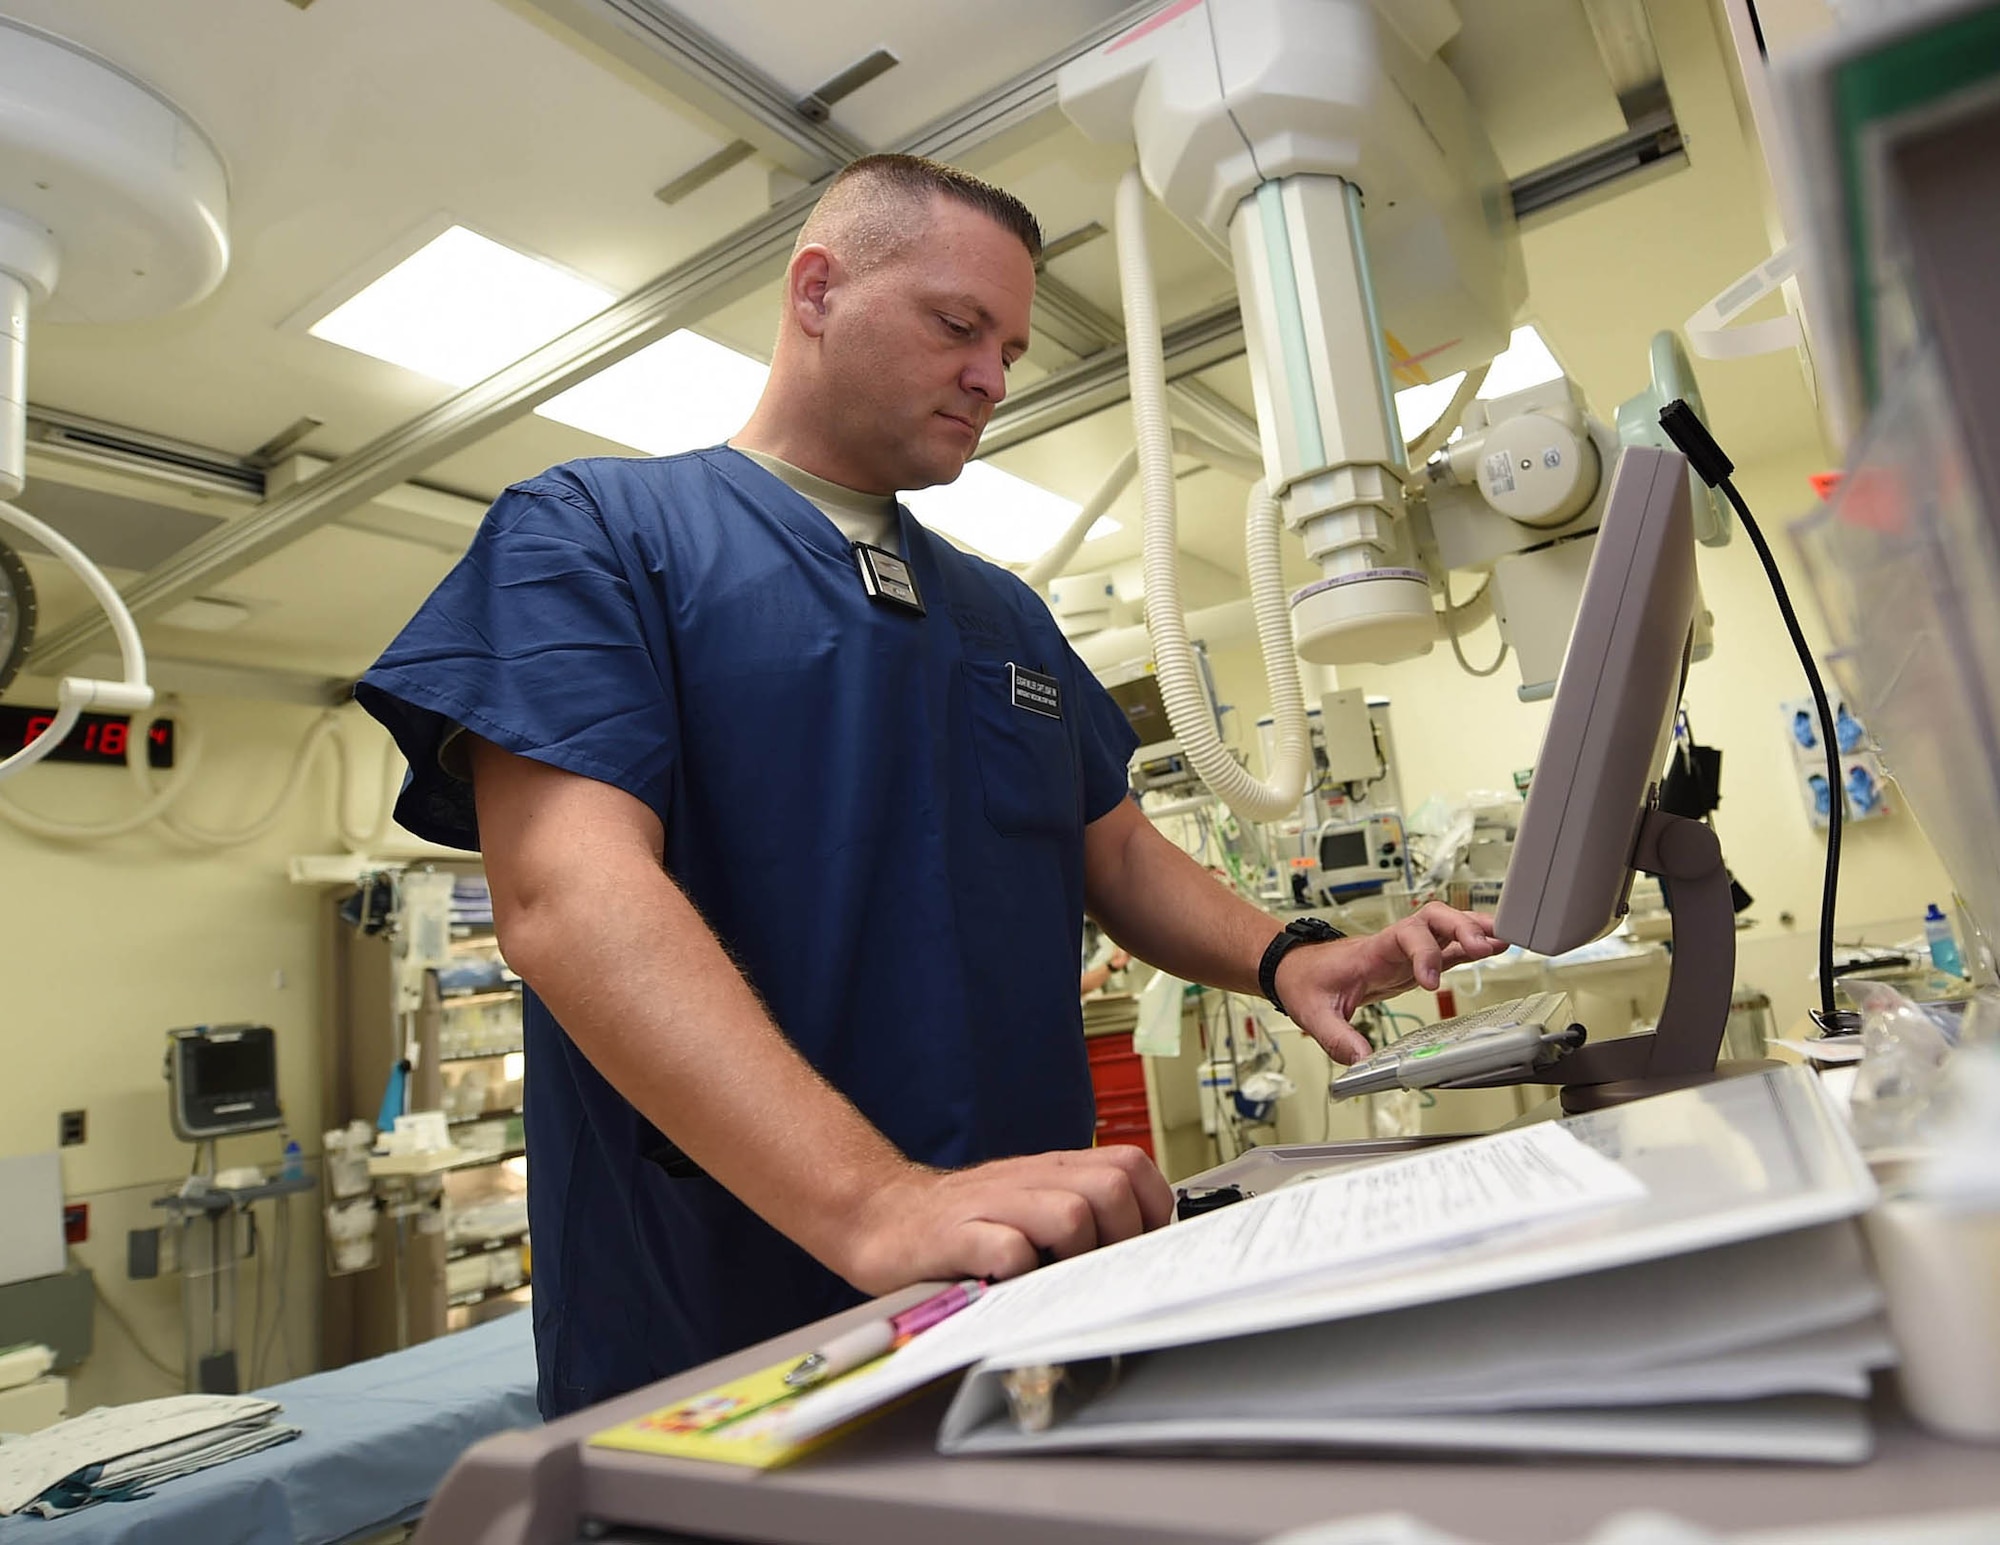 Capt. Edgar Miller, a nurse from the 959th Medical Group, logs into a Pyxis MedStation system in the emergency room at the San Antonio Military Medical Center, Joint Base San Antonio-Fort Sam Houston, Aug. 7, 2015. Airmen with the 959th MDG play a significant role in all facets of trauma care at SAMMC. (U.S. Air Force photo by Staff Sgt. Jerilyn Quintanilla)